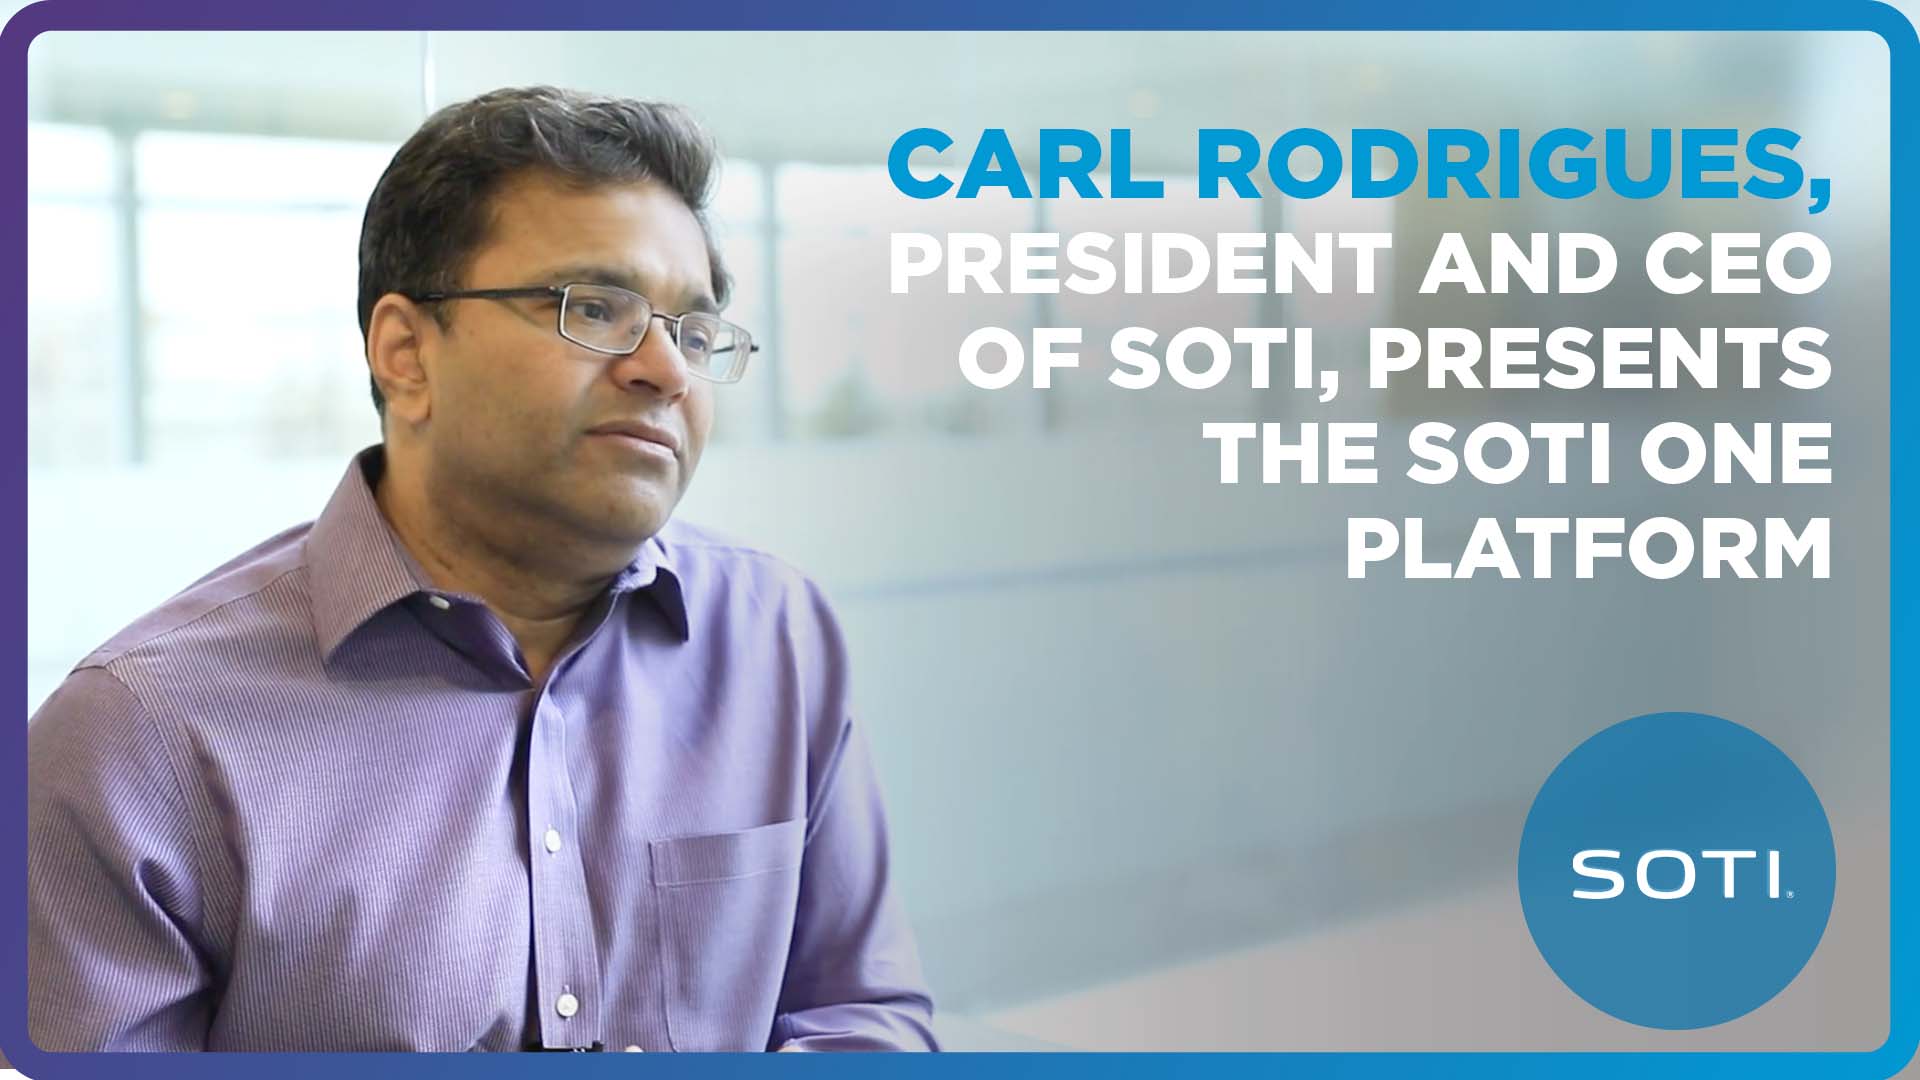 Video of Carl Rodrigues, President and CEO of SOTI, Presenting the SOTI ONE Plattform